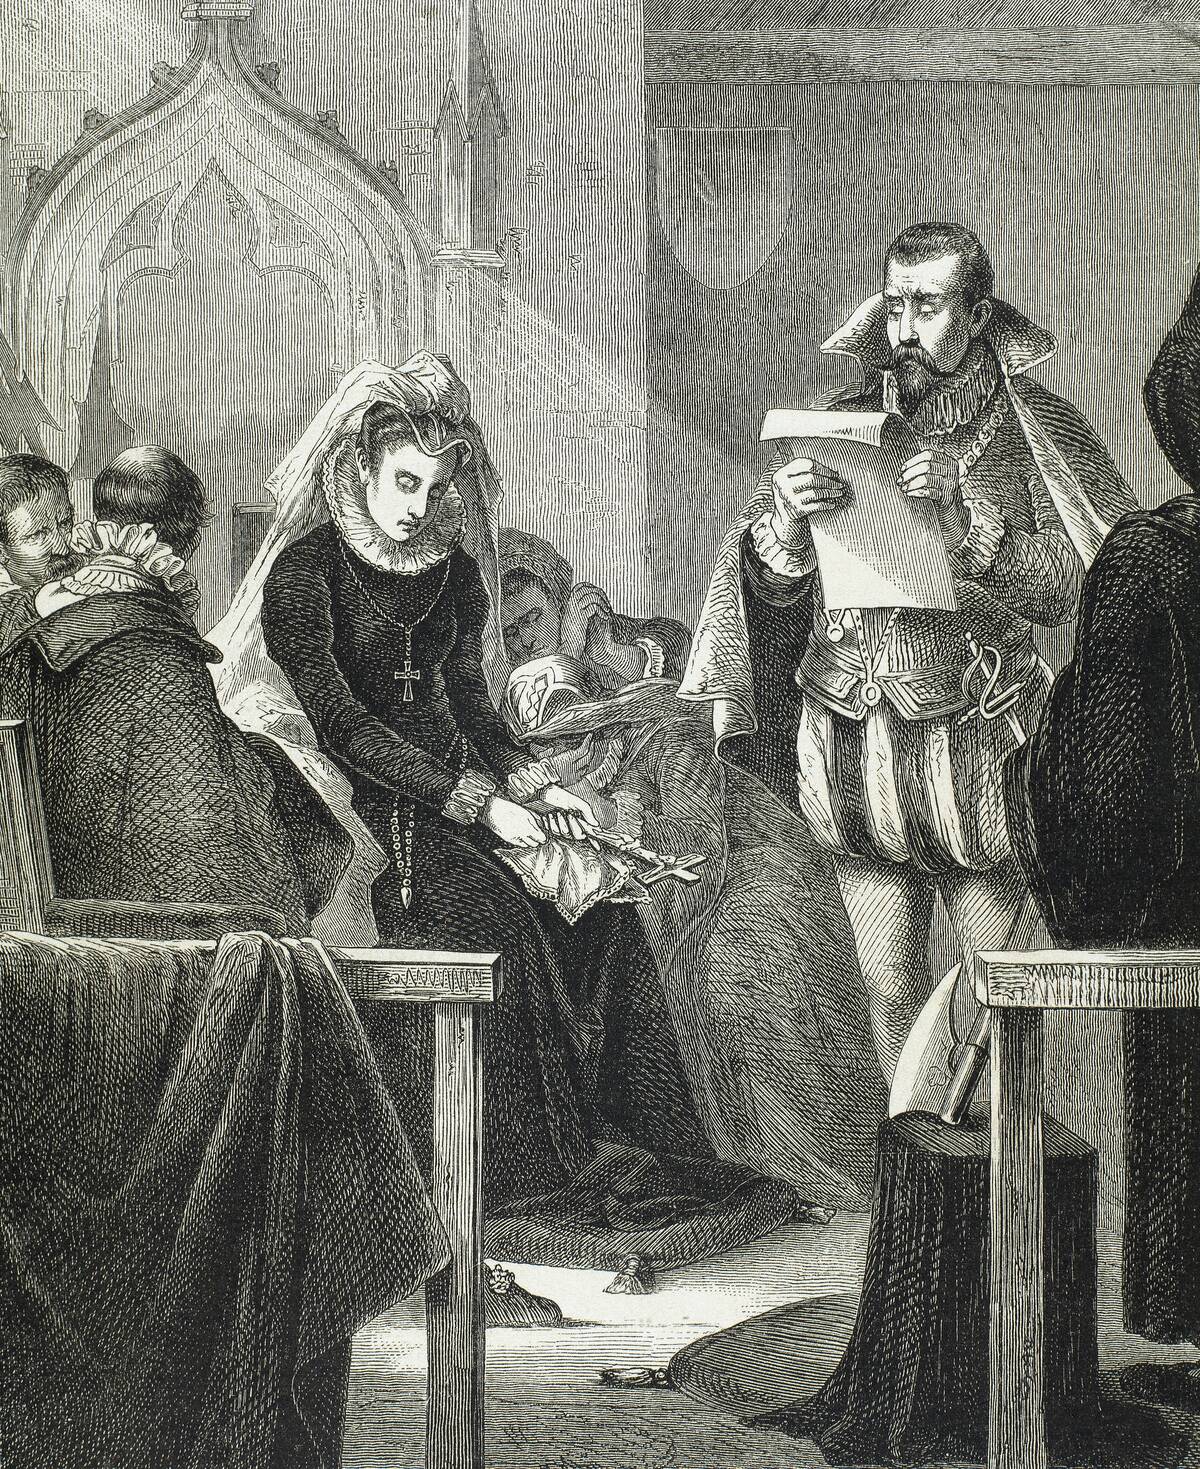 <p>Mary, Queen of Scots, arrived to her death with dignity. Within the Great Hall at Fotheringhay Castle, a scaffold was erected and draped in black cloth. It was furnished with the block and a cushion for Mary to kneel on. Three stools were also set up; two for the witnesses and one for Mary.</p> <p>As it was typical to ask the pardon of the one being put to death, the executioner knelt before Mary and asked her forgiveness to which she replied, "I forgive you with all my heart, for now, I hope, you shall make an end of all my troubles."</p>